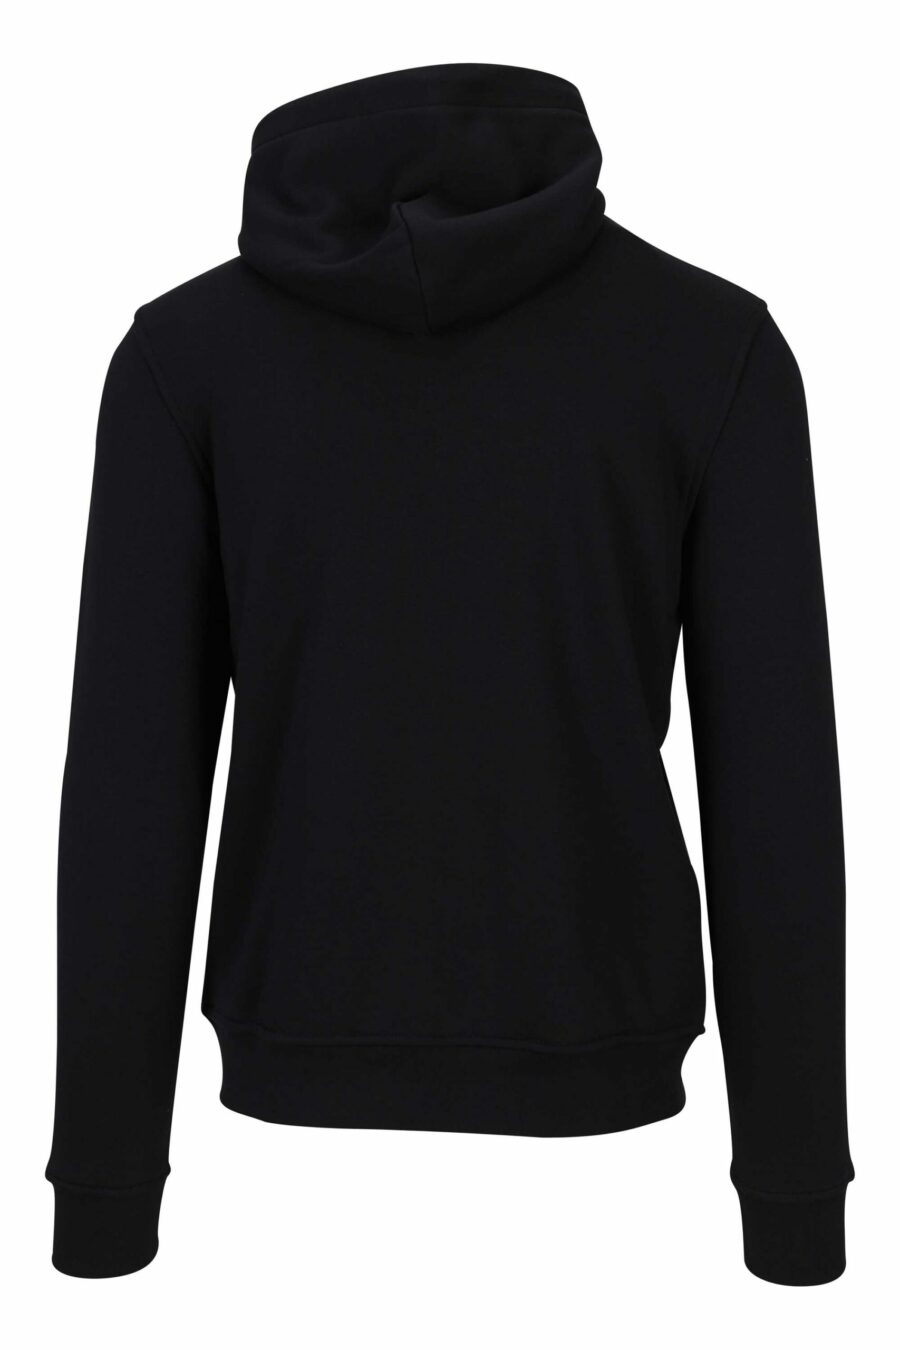 Black hooded sweatshirt with zips and rubber mini-logo - 4062226653459 1 1 scaled